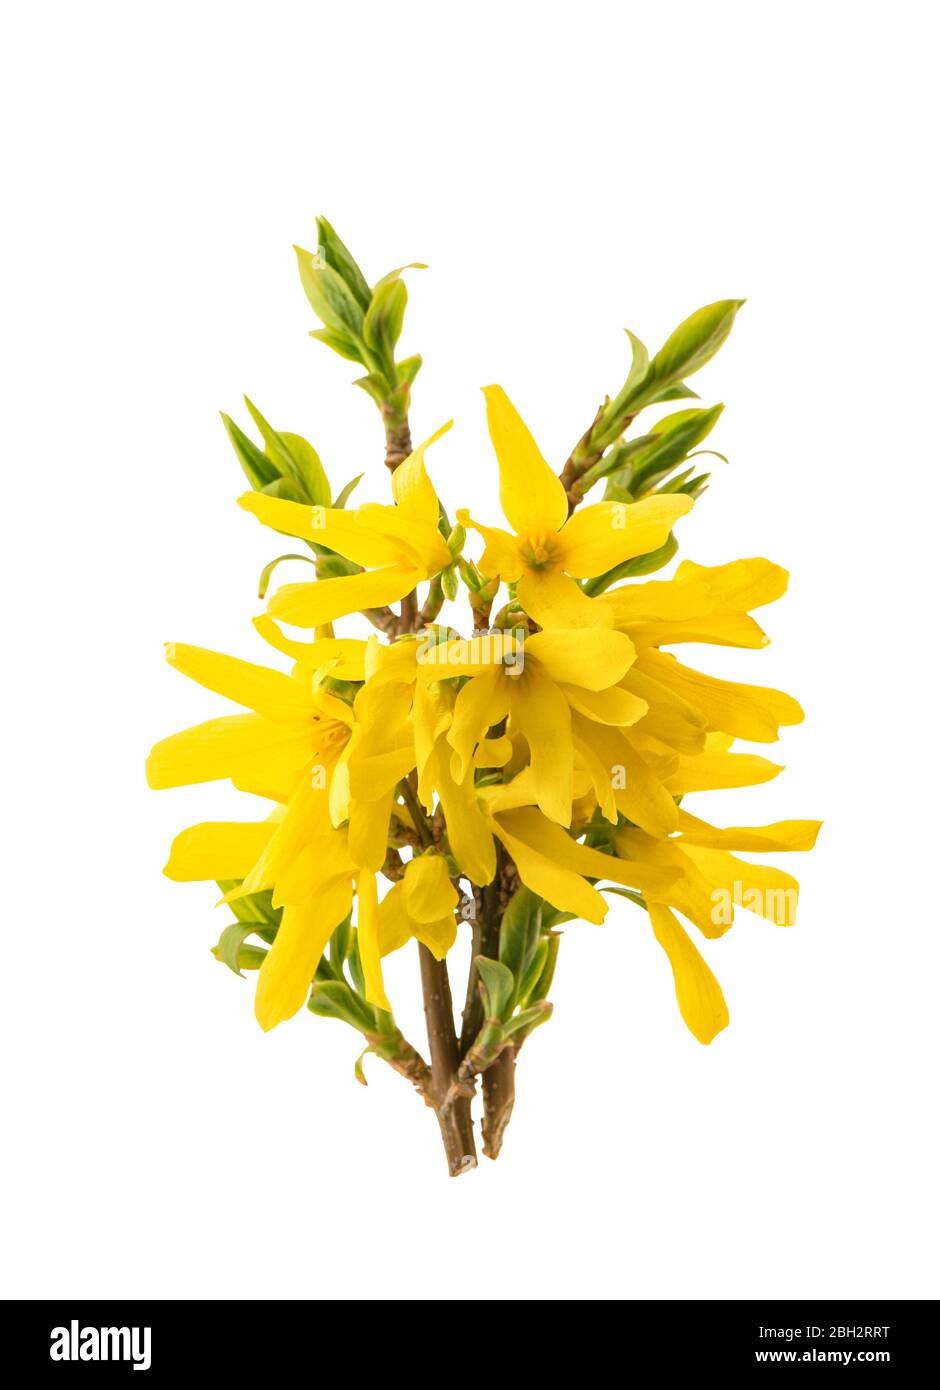 Blossoming forsythia flower with green leaves isolated on white background Stock Photo